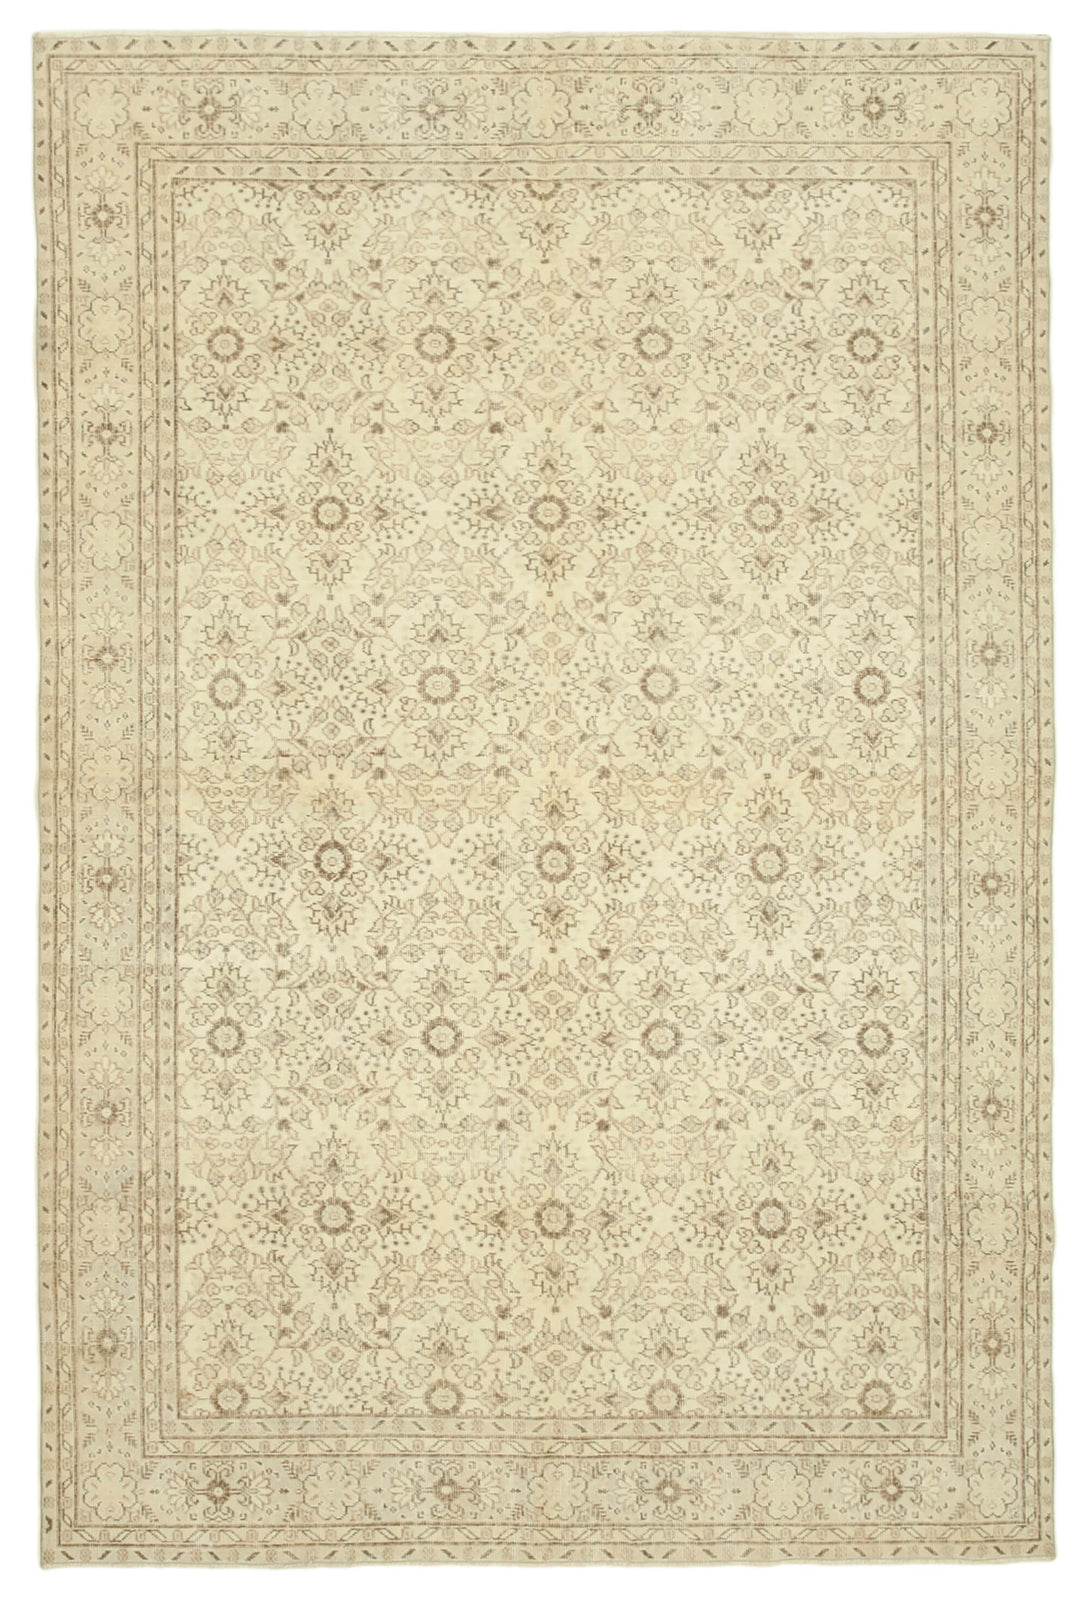 Handmade White Wash Area Rug > Design# OL-AC-38861 > Size: 6'-11" x 10'-6", Carpet Culture Rugs, Handmade Rugs, NYC Rugs, New Rugs, Shop Rugs, Rug Store, Outlet Rugs, SoHo Rugs, Rugs in USA